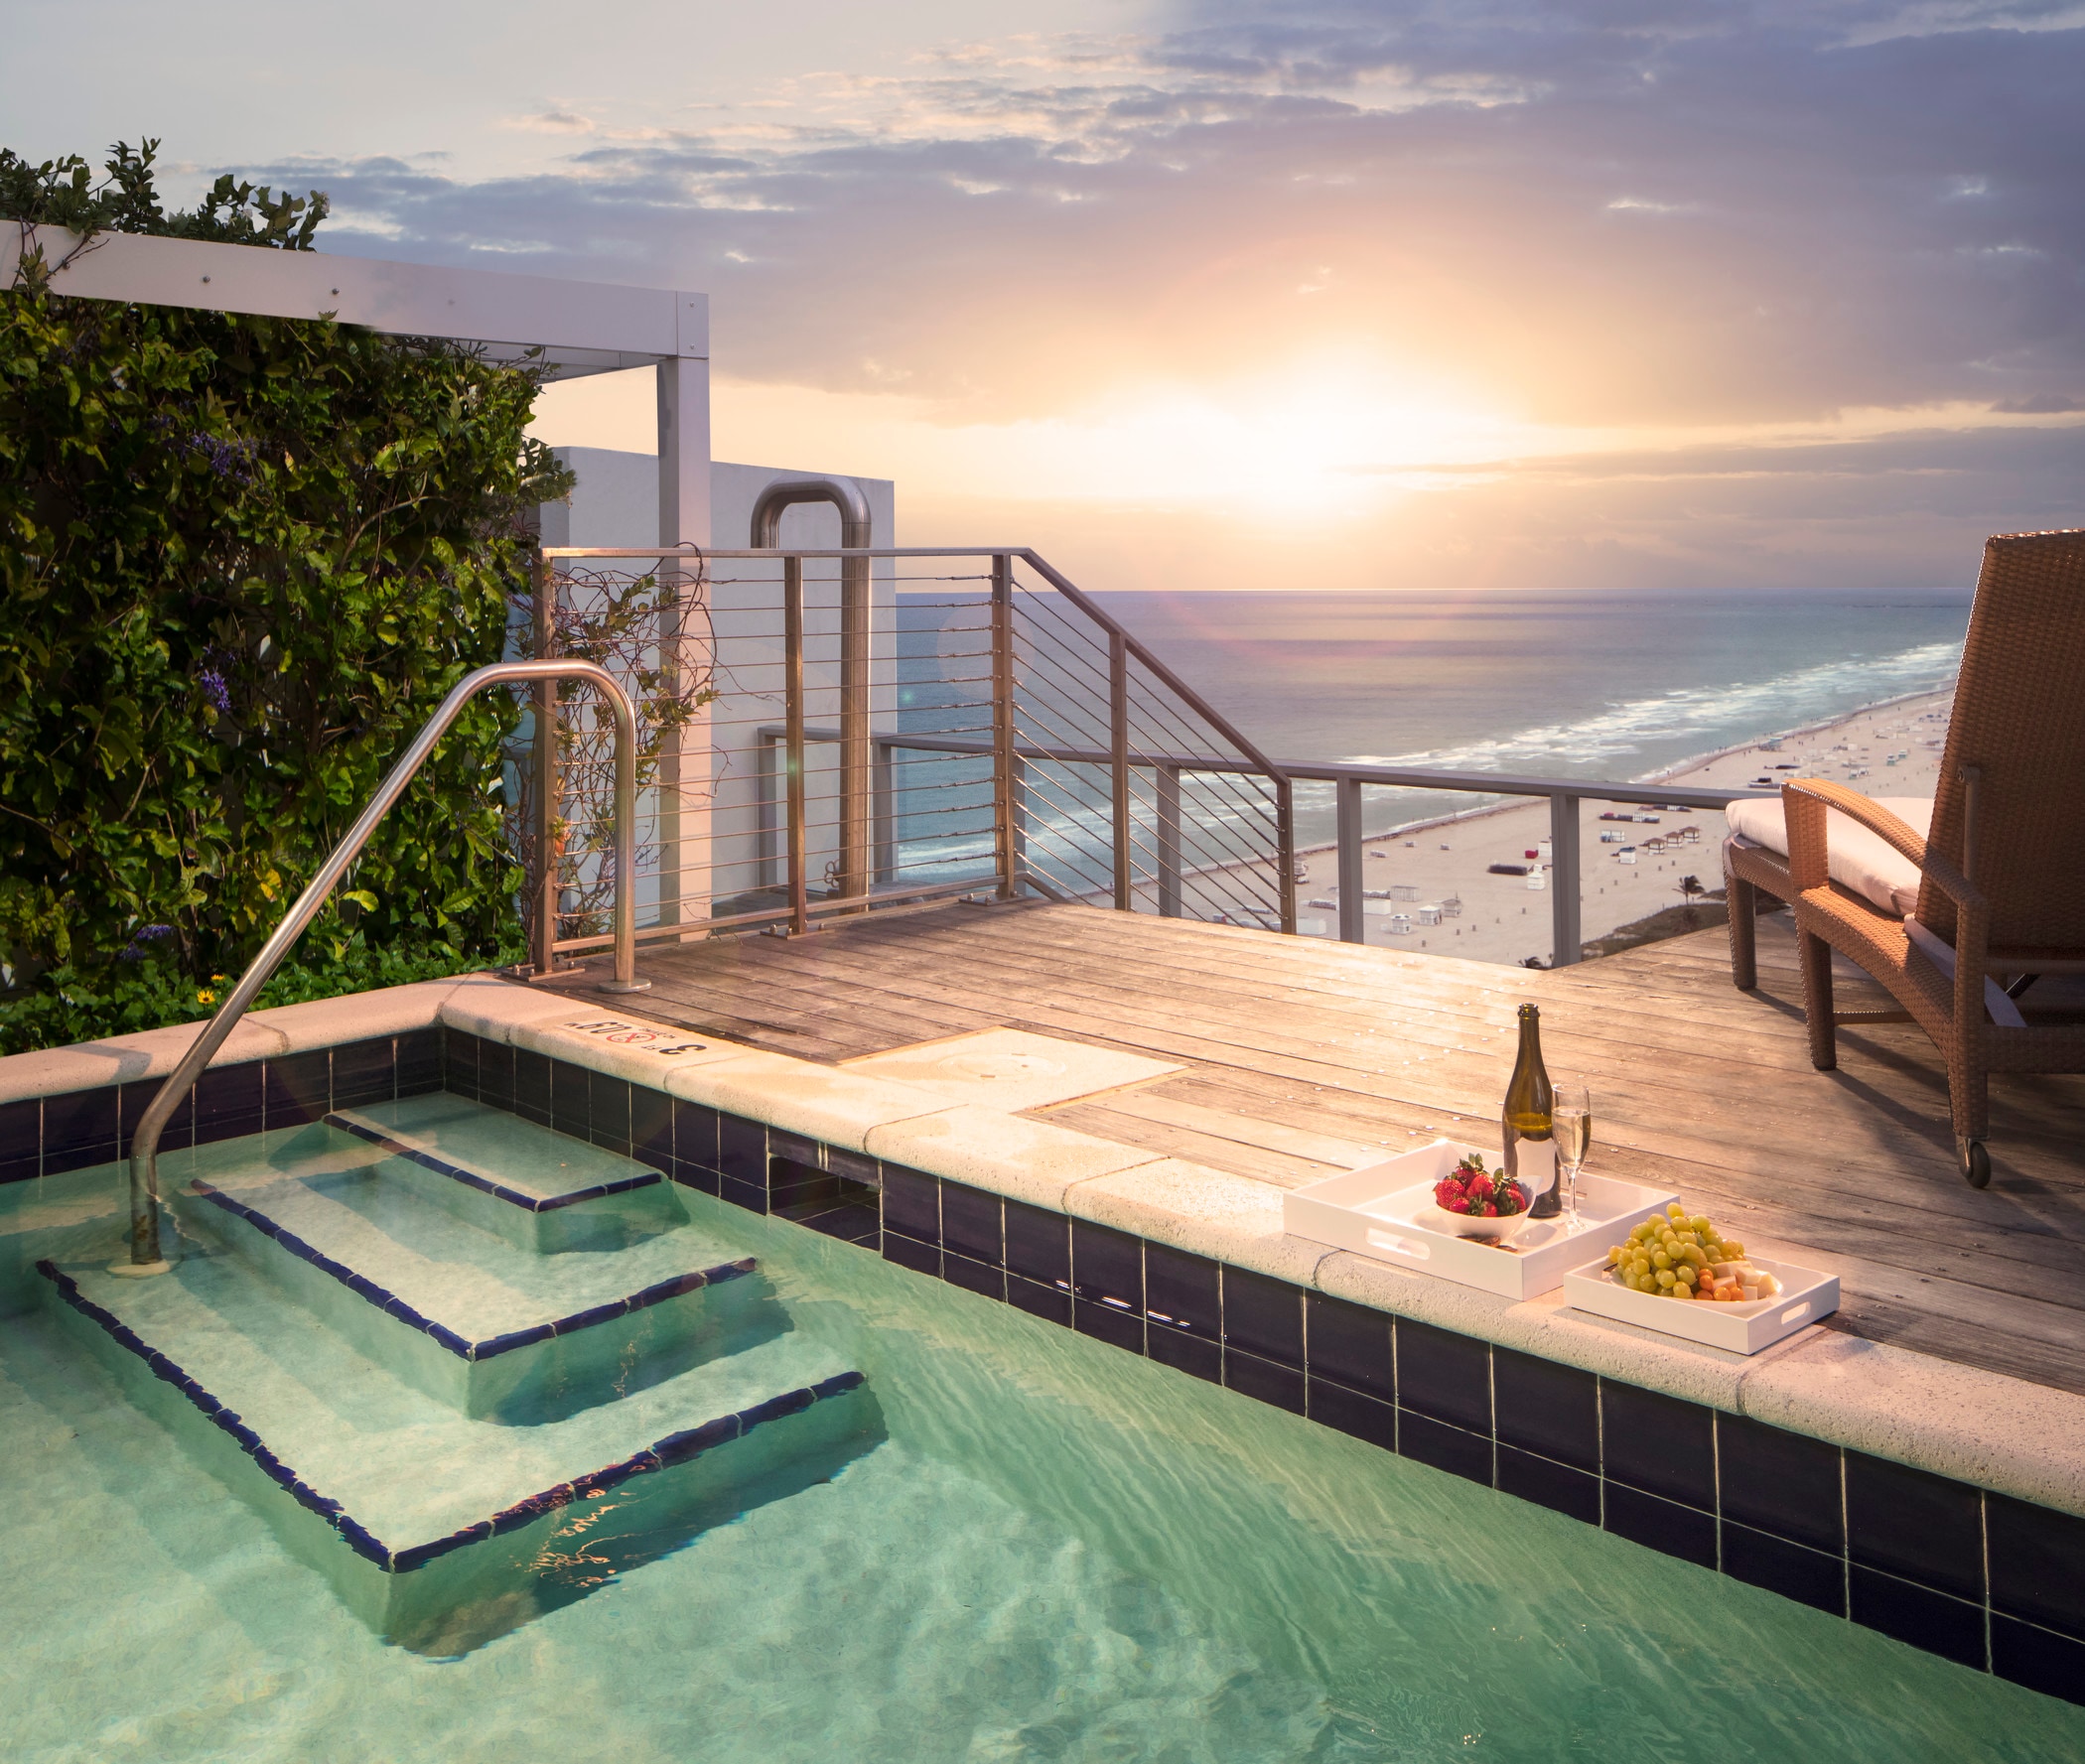 Rootop pool on balcony with ocean view